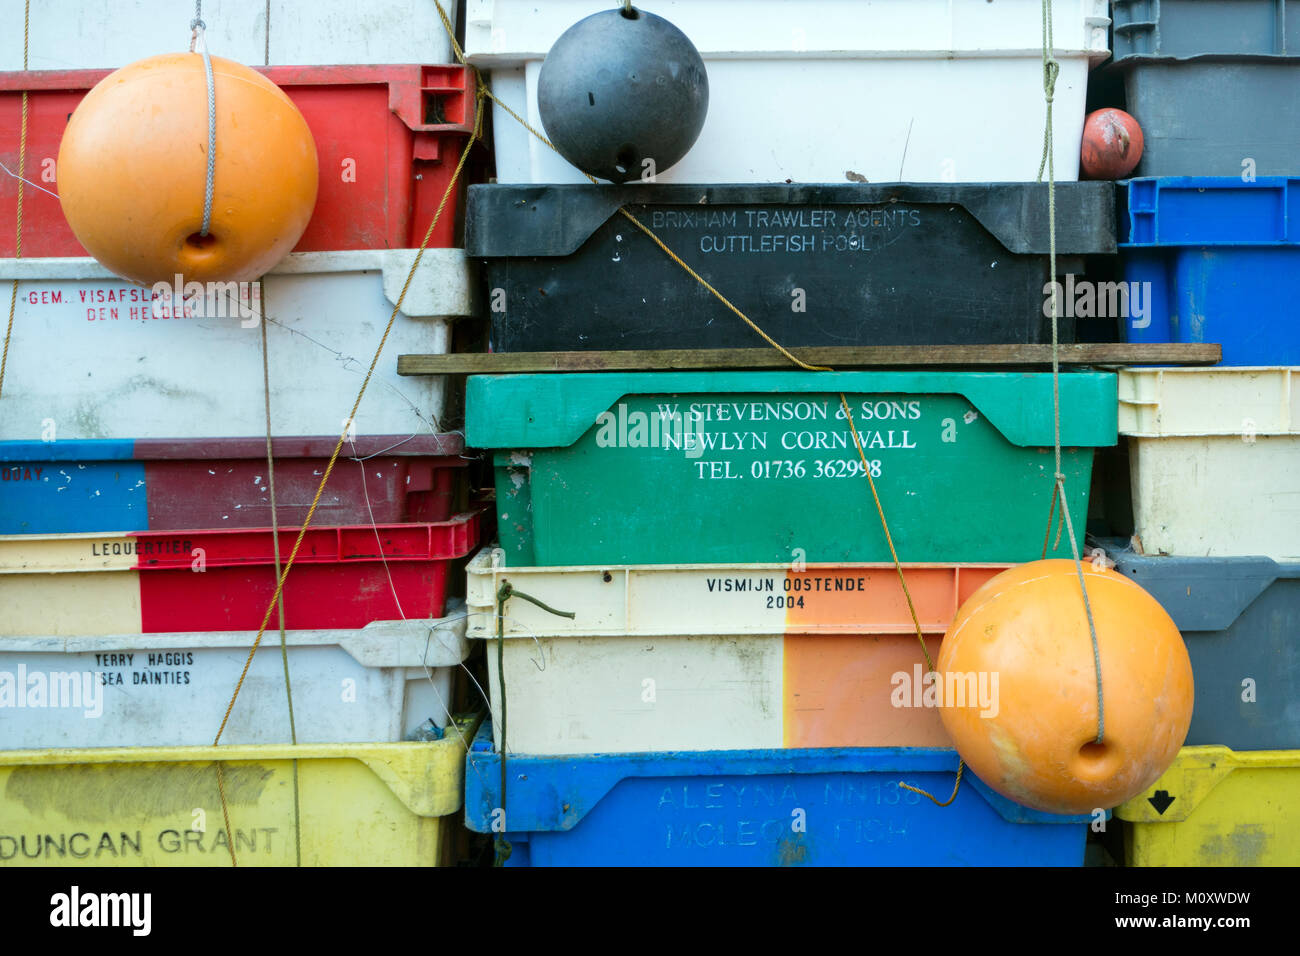 AMRUM, GERMANY - JANUARY 02, 2018: Fishing crates, buoys and other maritime objects in front of the old bar Blaue Maus on the North Frisian island Amr Stock Photo